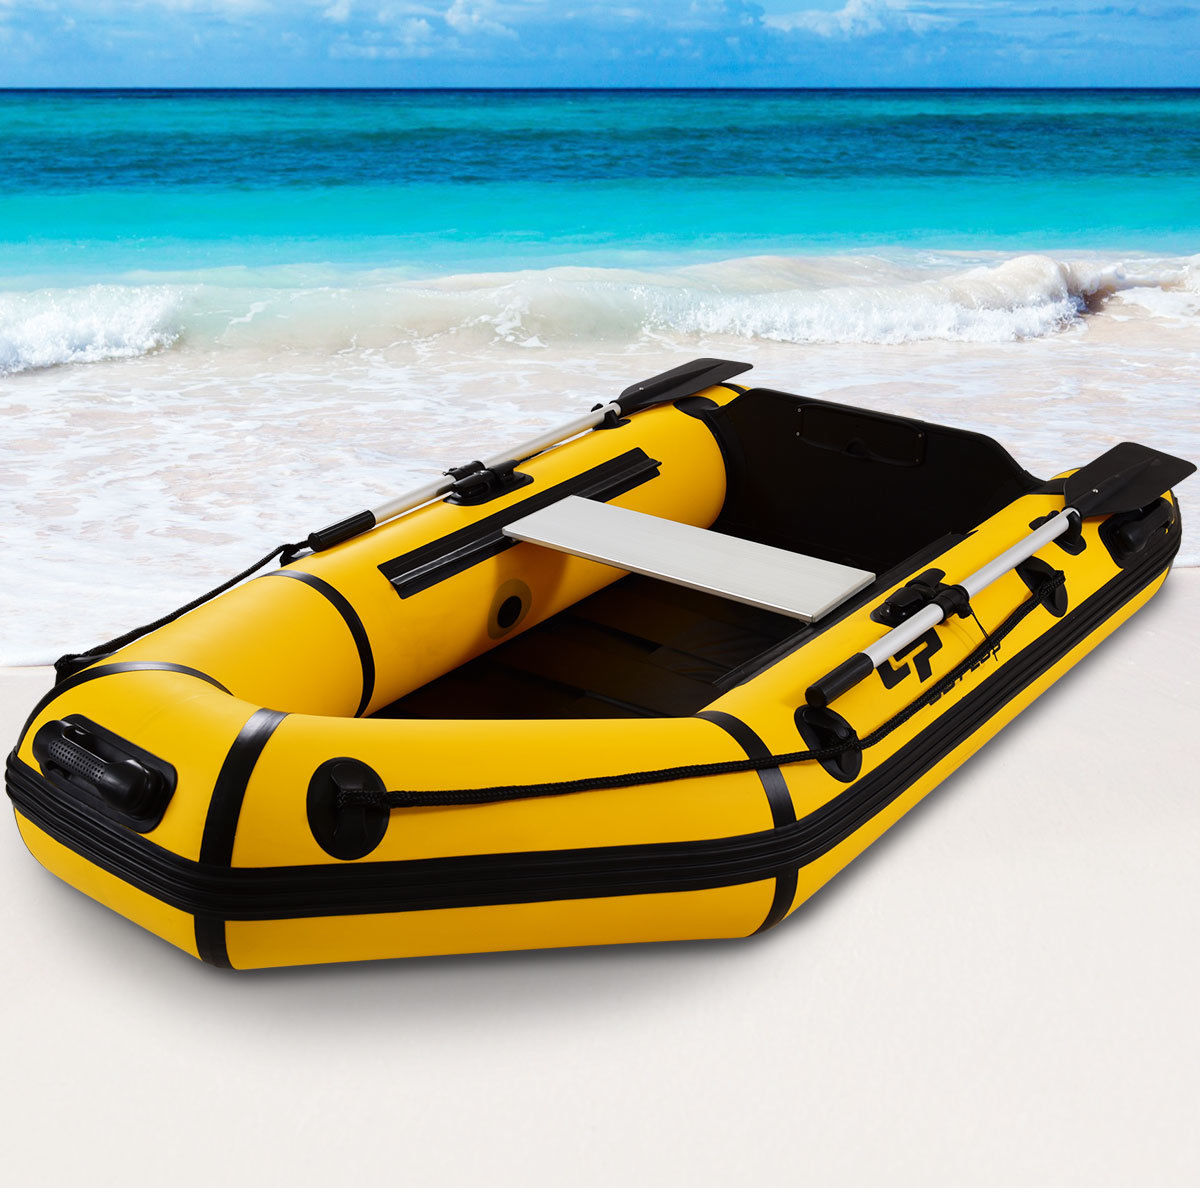 Goplus 2 Person 7.5FT Inflatable Dinghy Boat Fishing Tender Rafting Water (Best Inflatable Dinghy For Cruising)